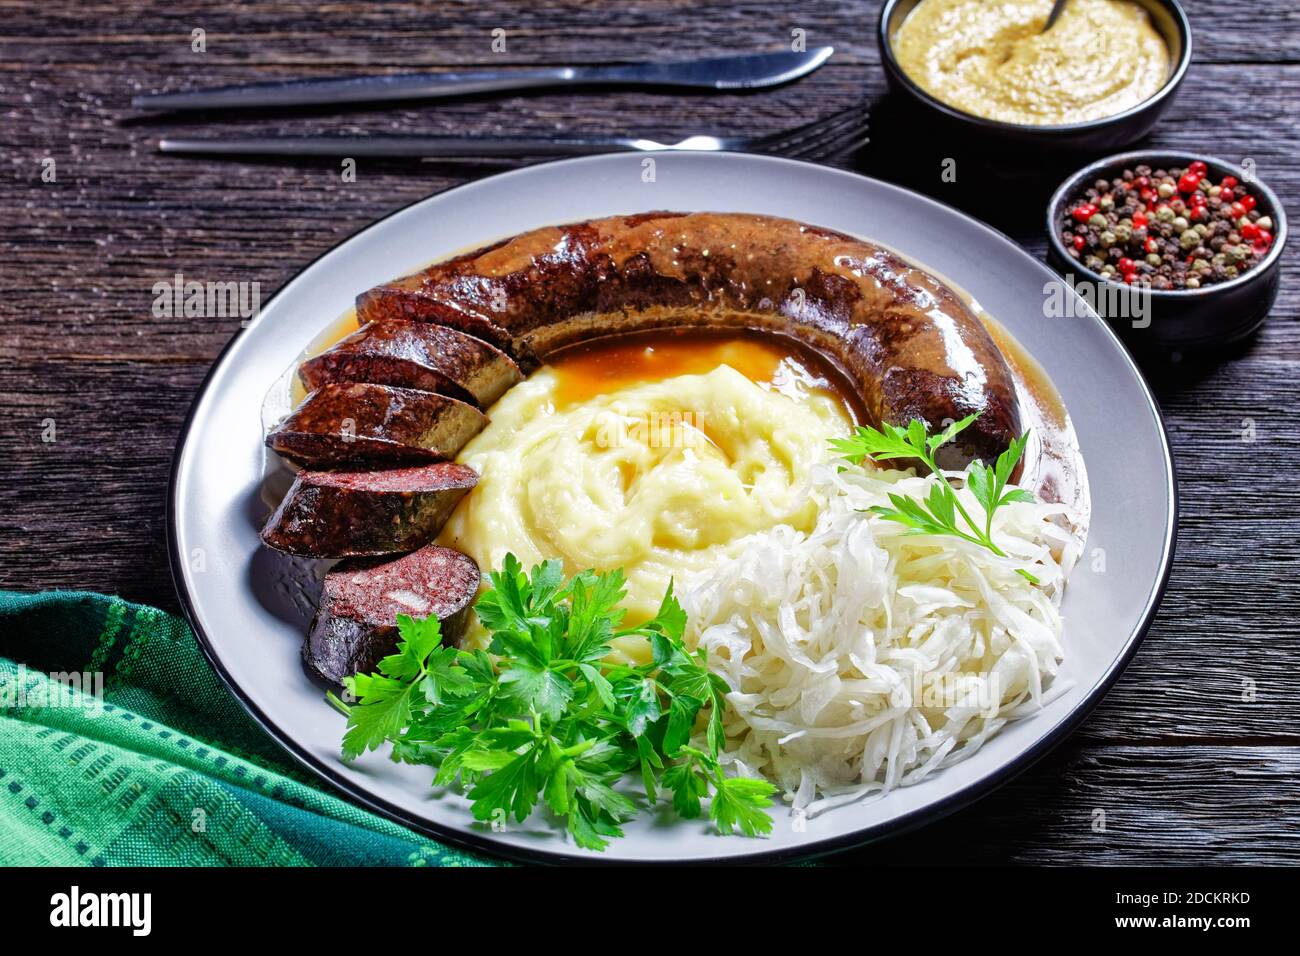 German food: blutwurst or blood sausage served on a plate with sauerkraut, mashed potato parsley, mustard, and peppercorns on a dark wooden table, top Stock Photo